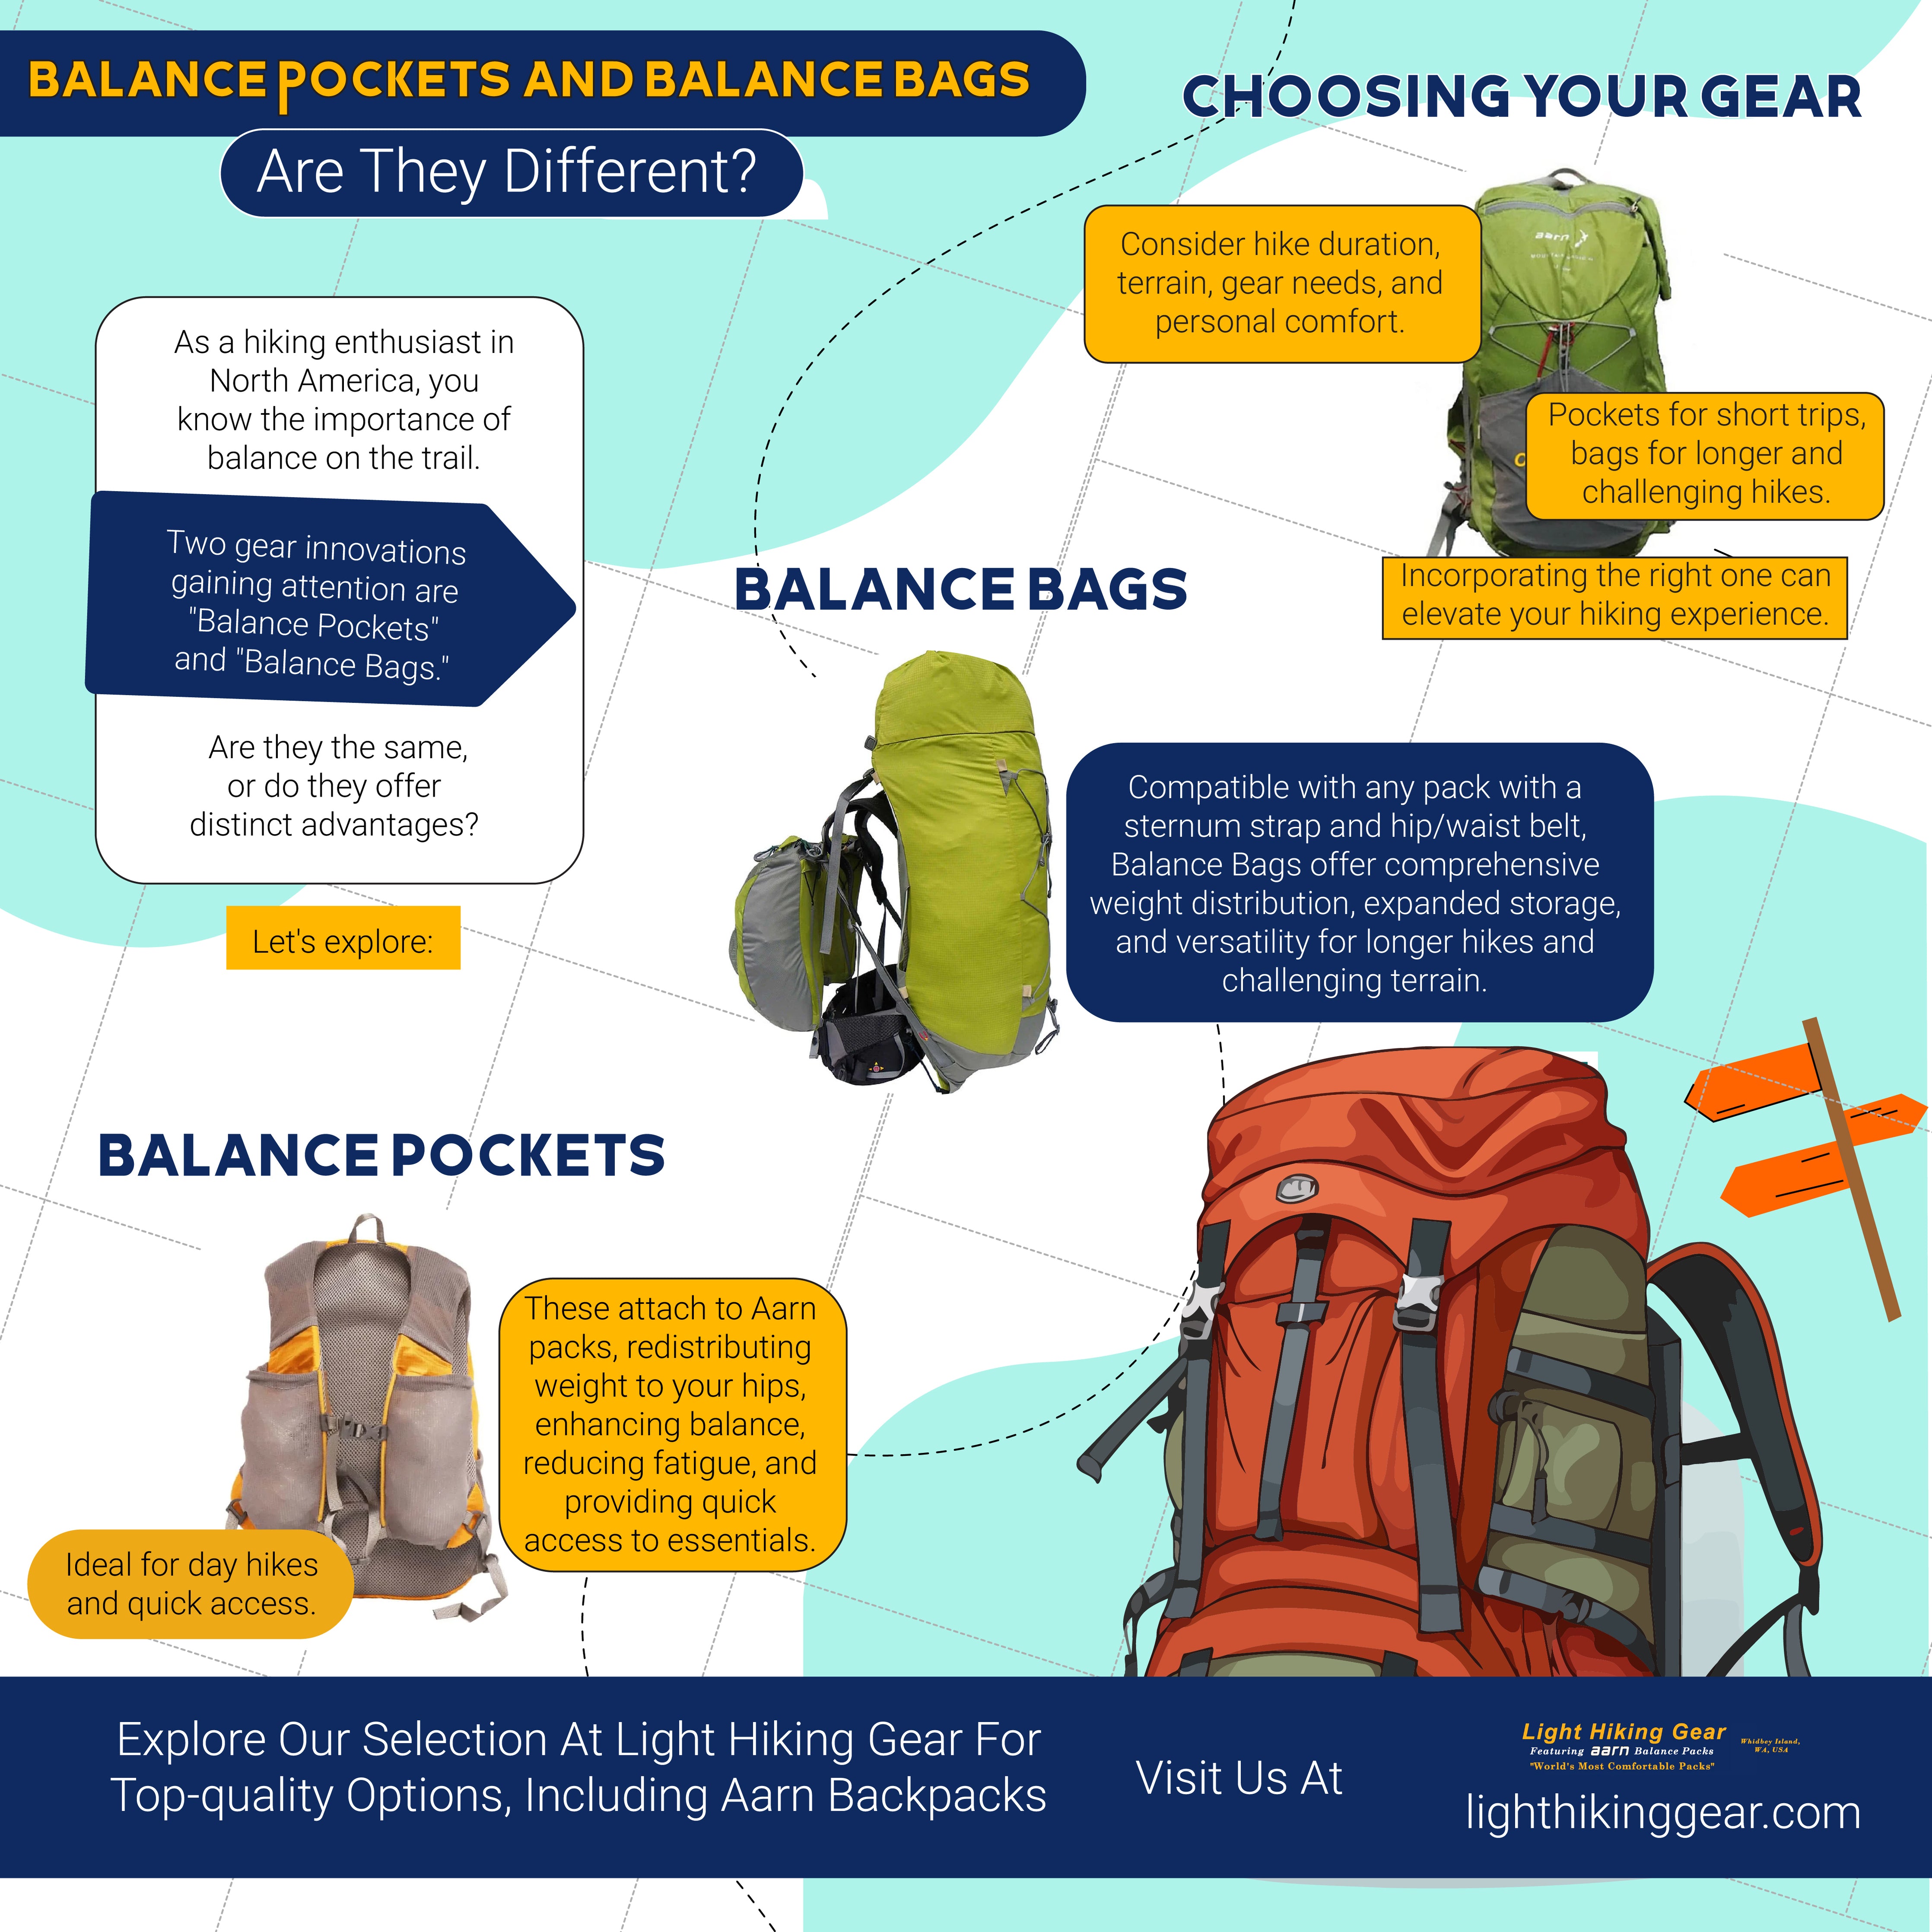 Balance Pockets And Balance Bags: Are They Different?